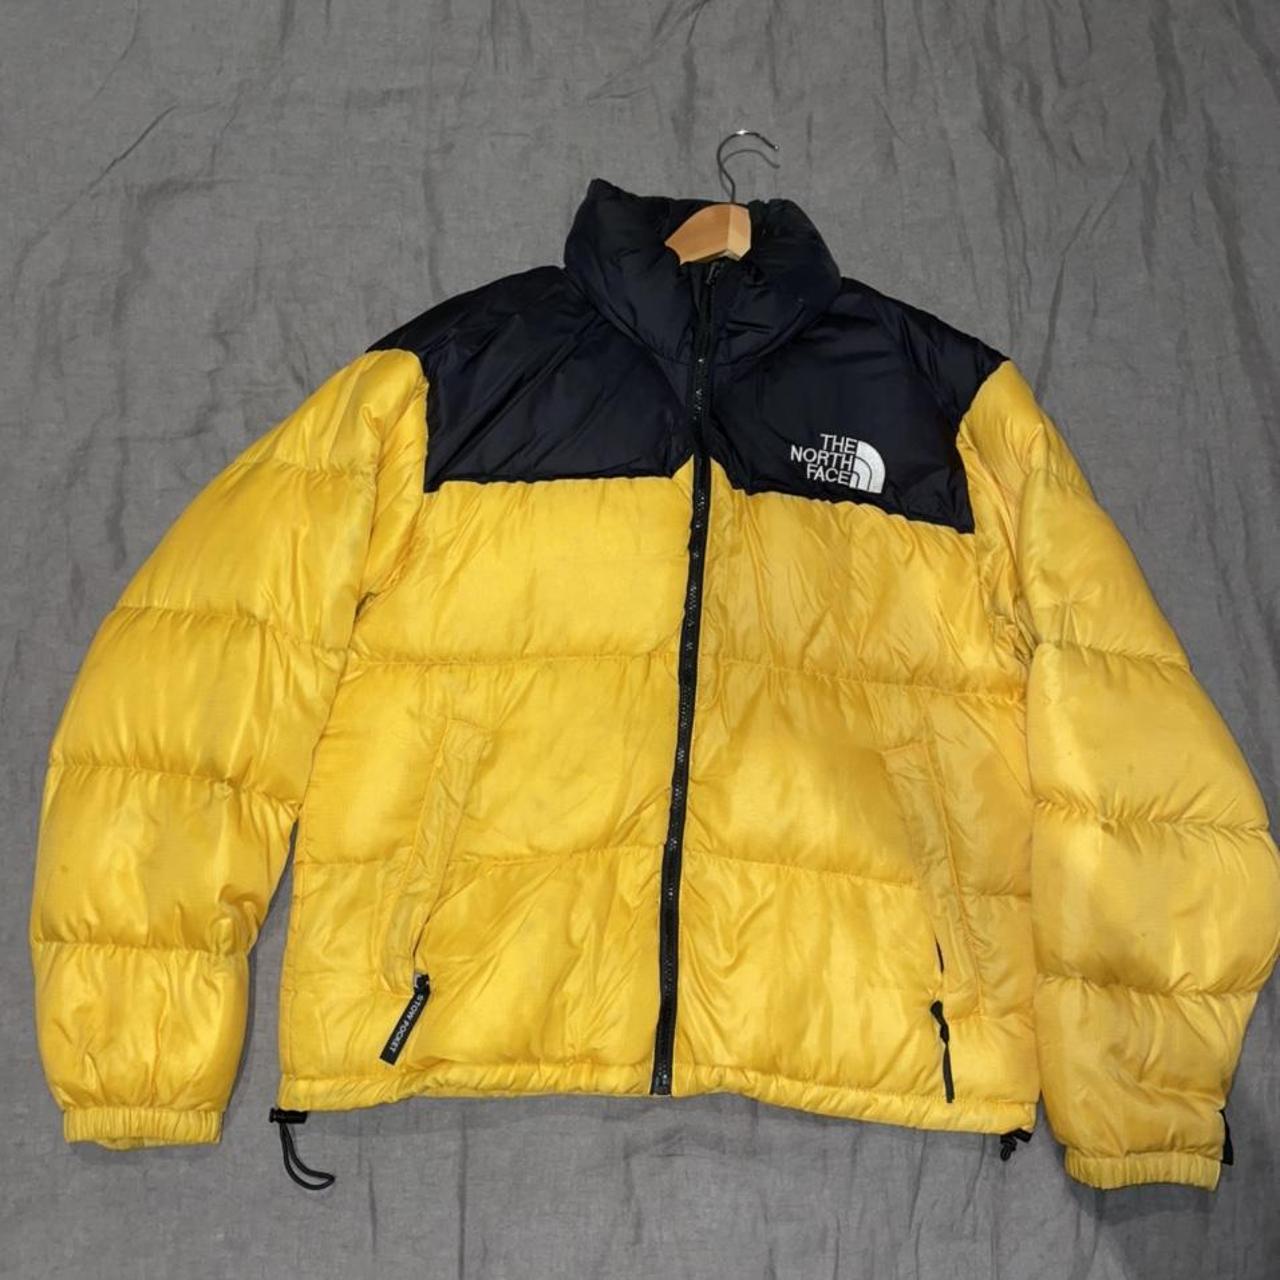 The North Face Men's Black and Yellow Jacket | Depop